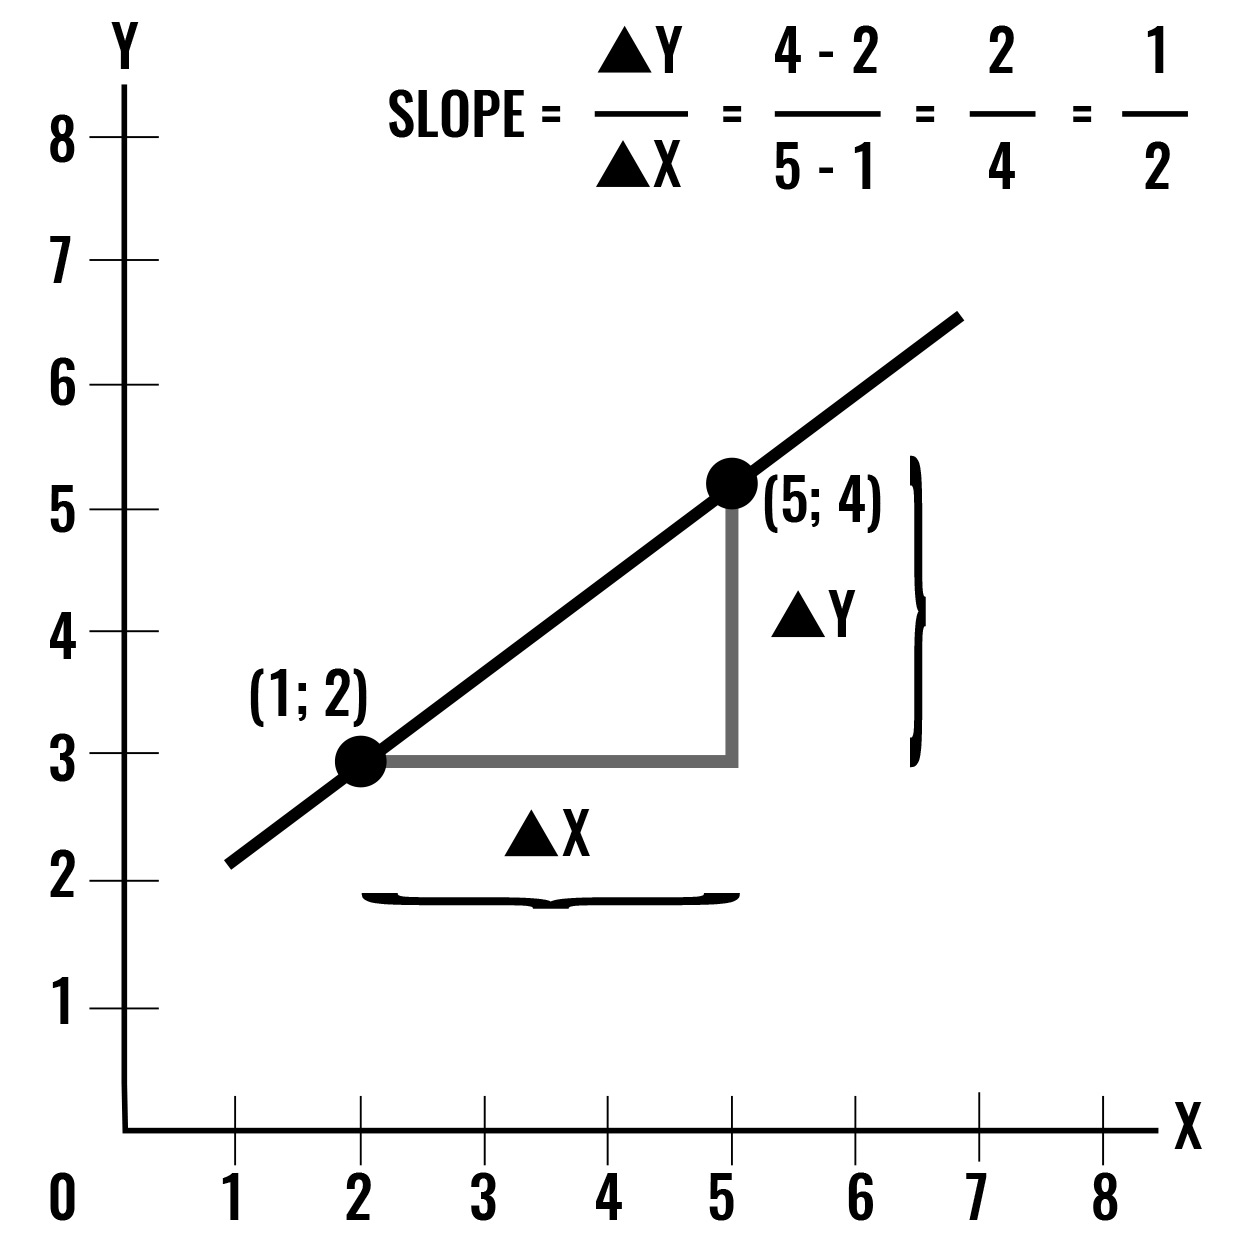 The graph shows a positive slope.